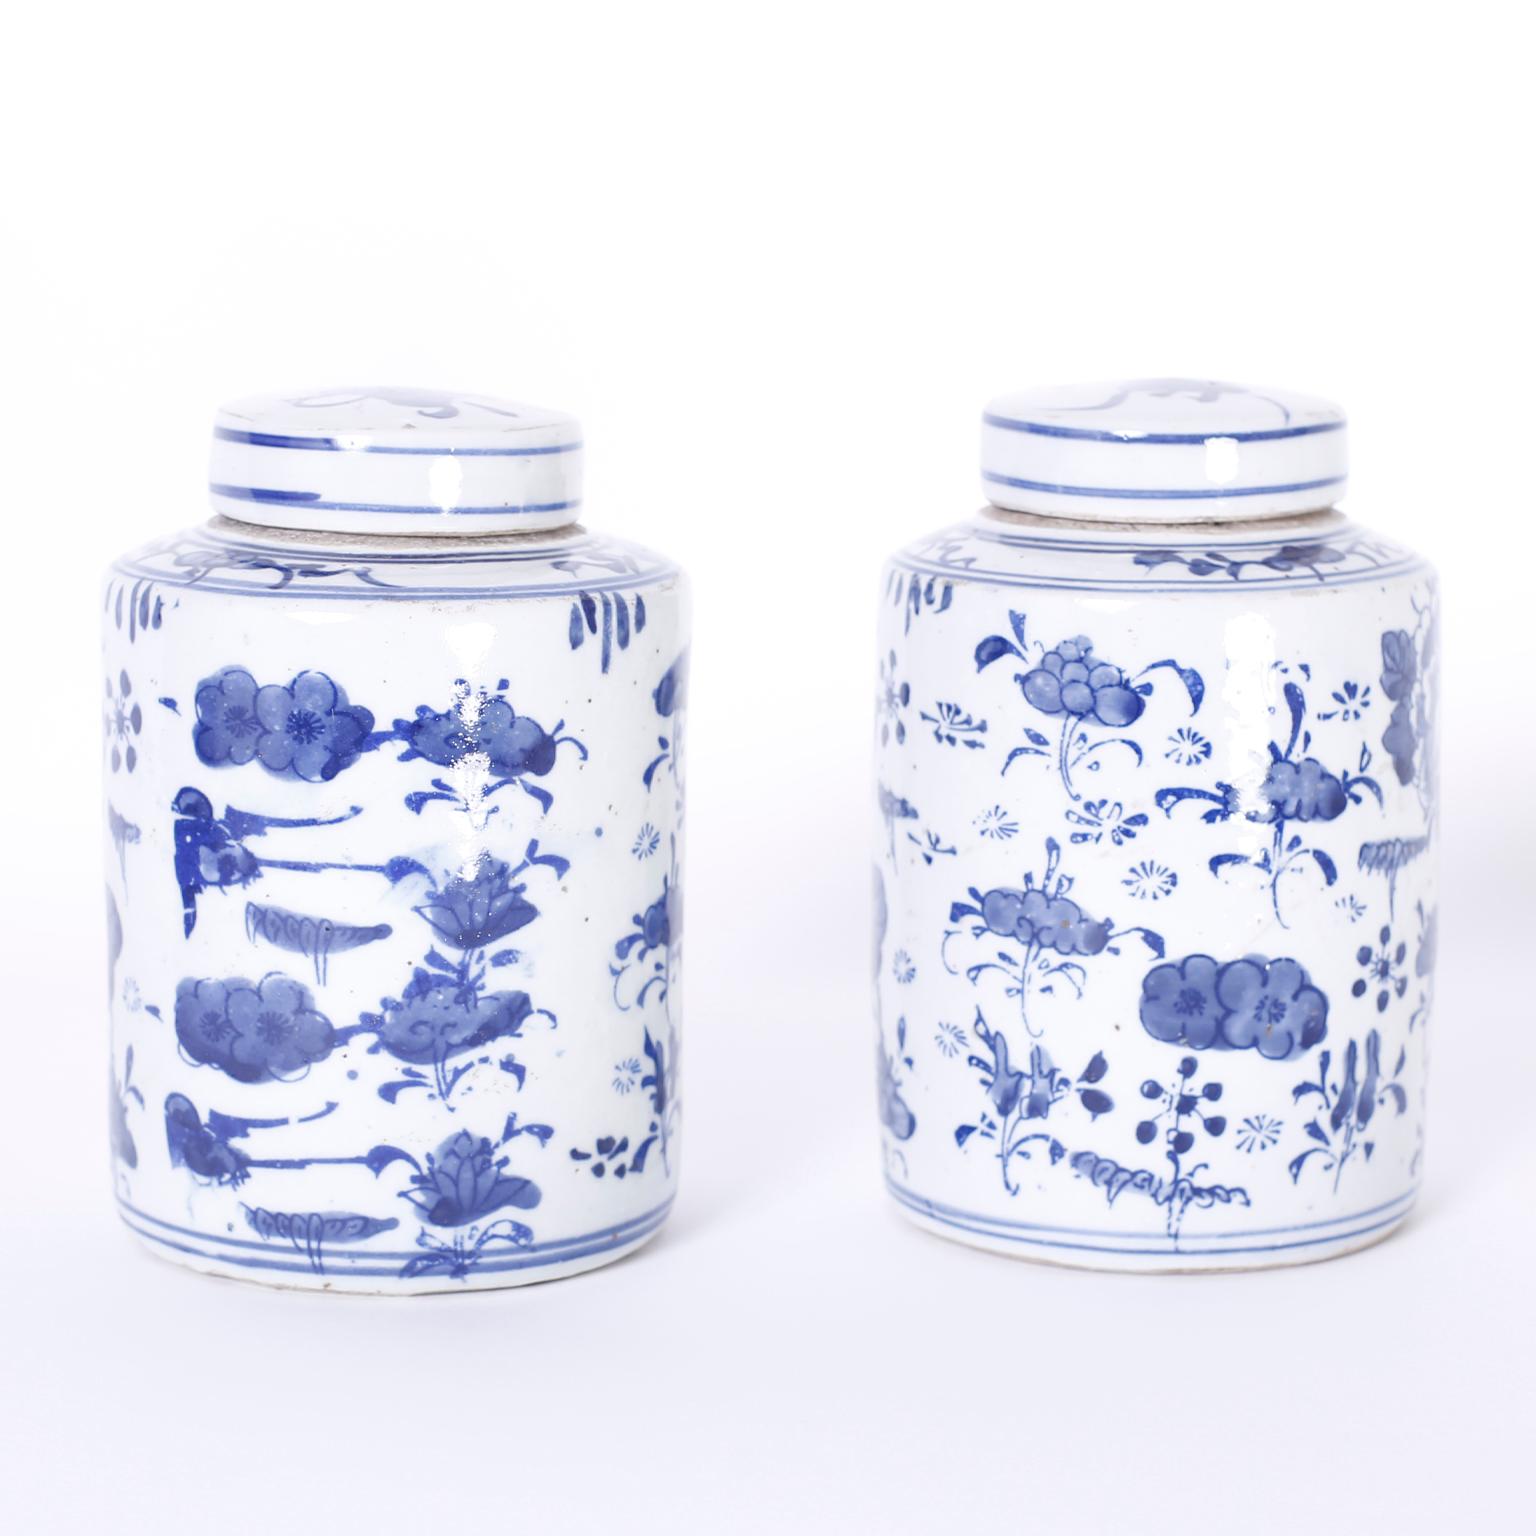 Pair of Chinese blue and white porcelain lidded tea caddies hand painted with poppies and assorted flowers.